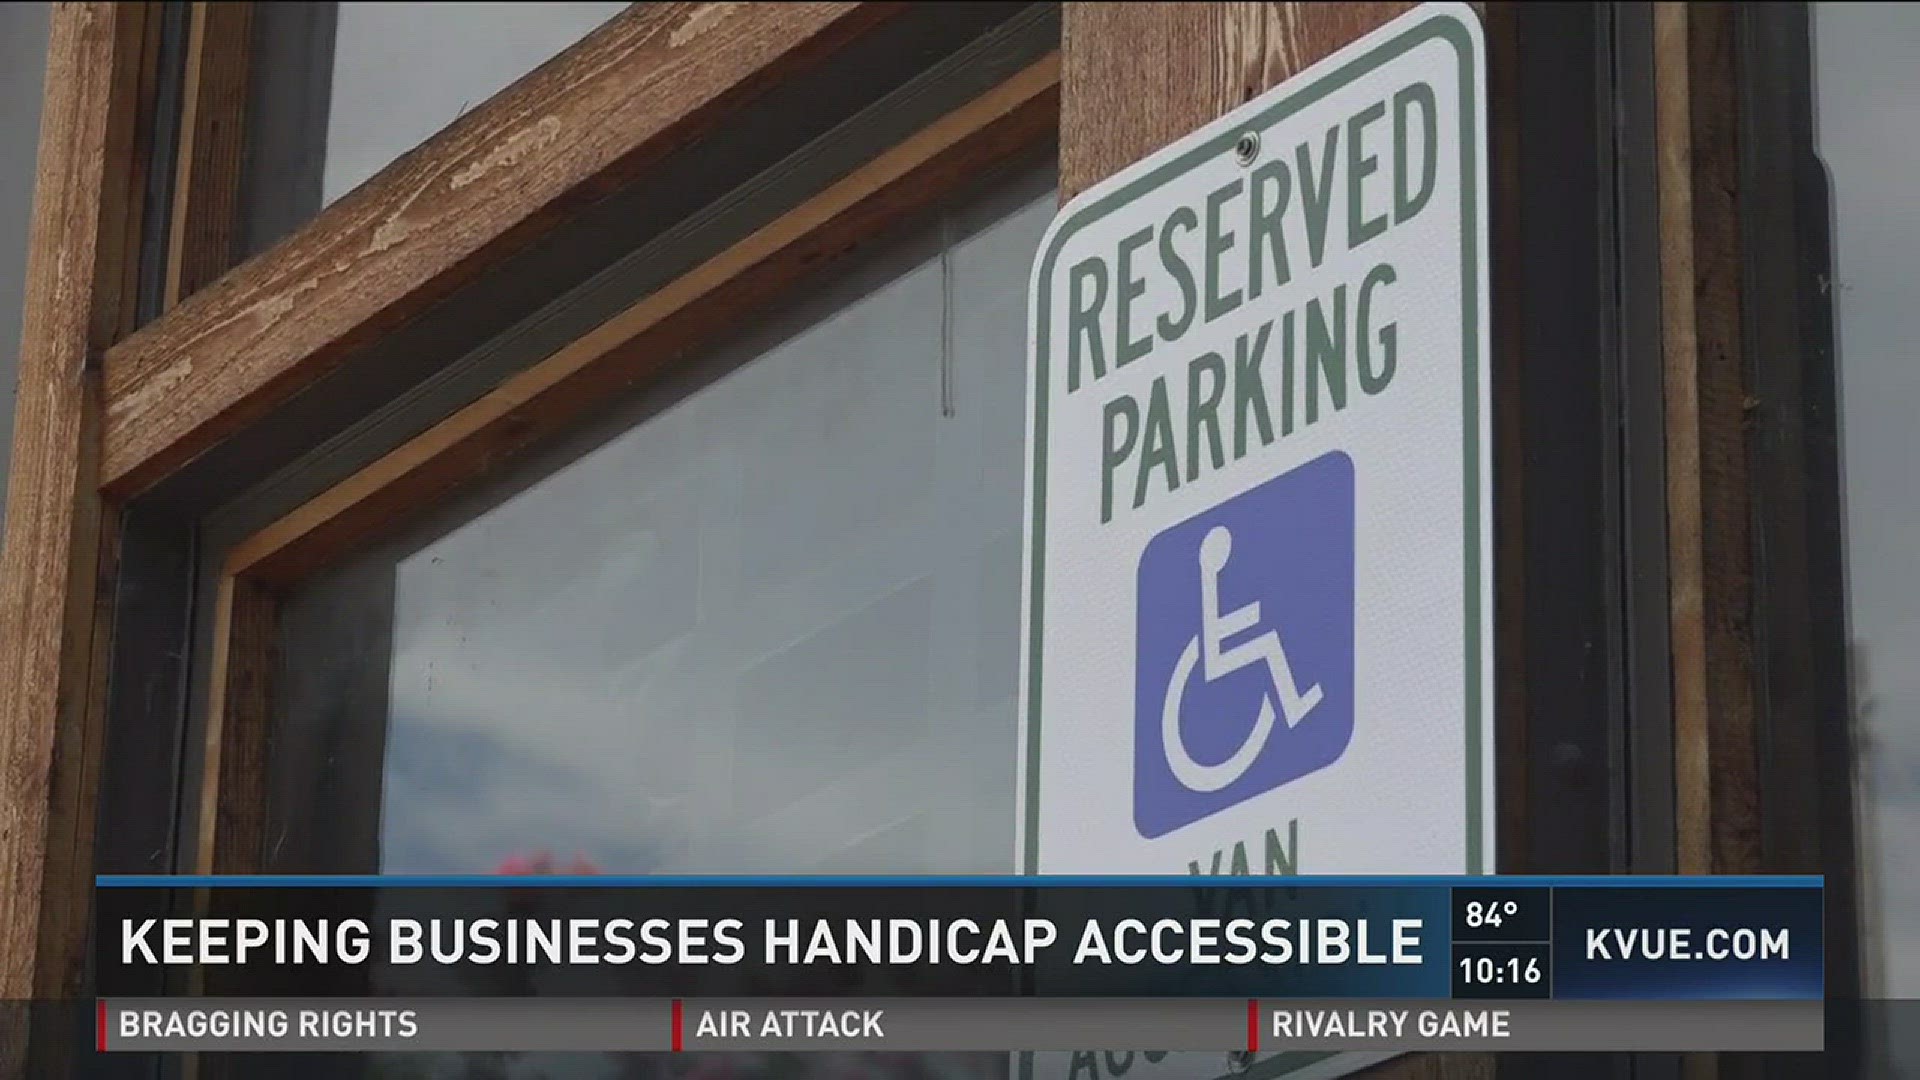 Keeping businesses handicap accessible